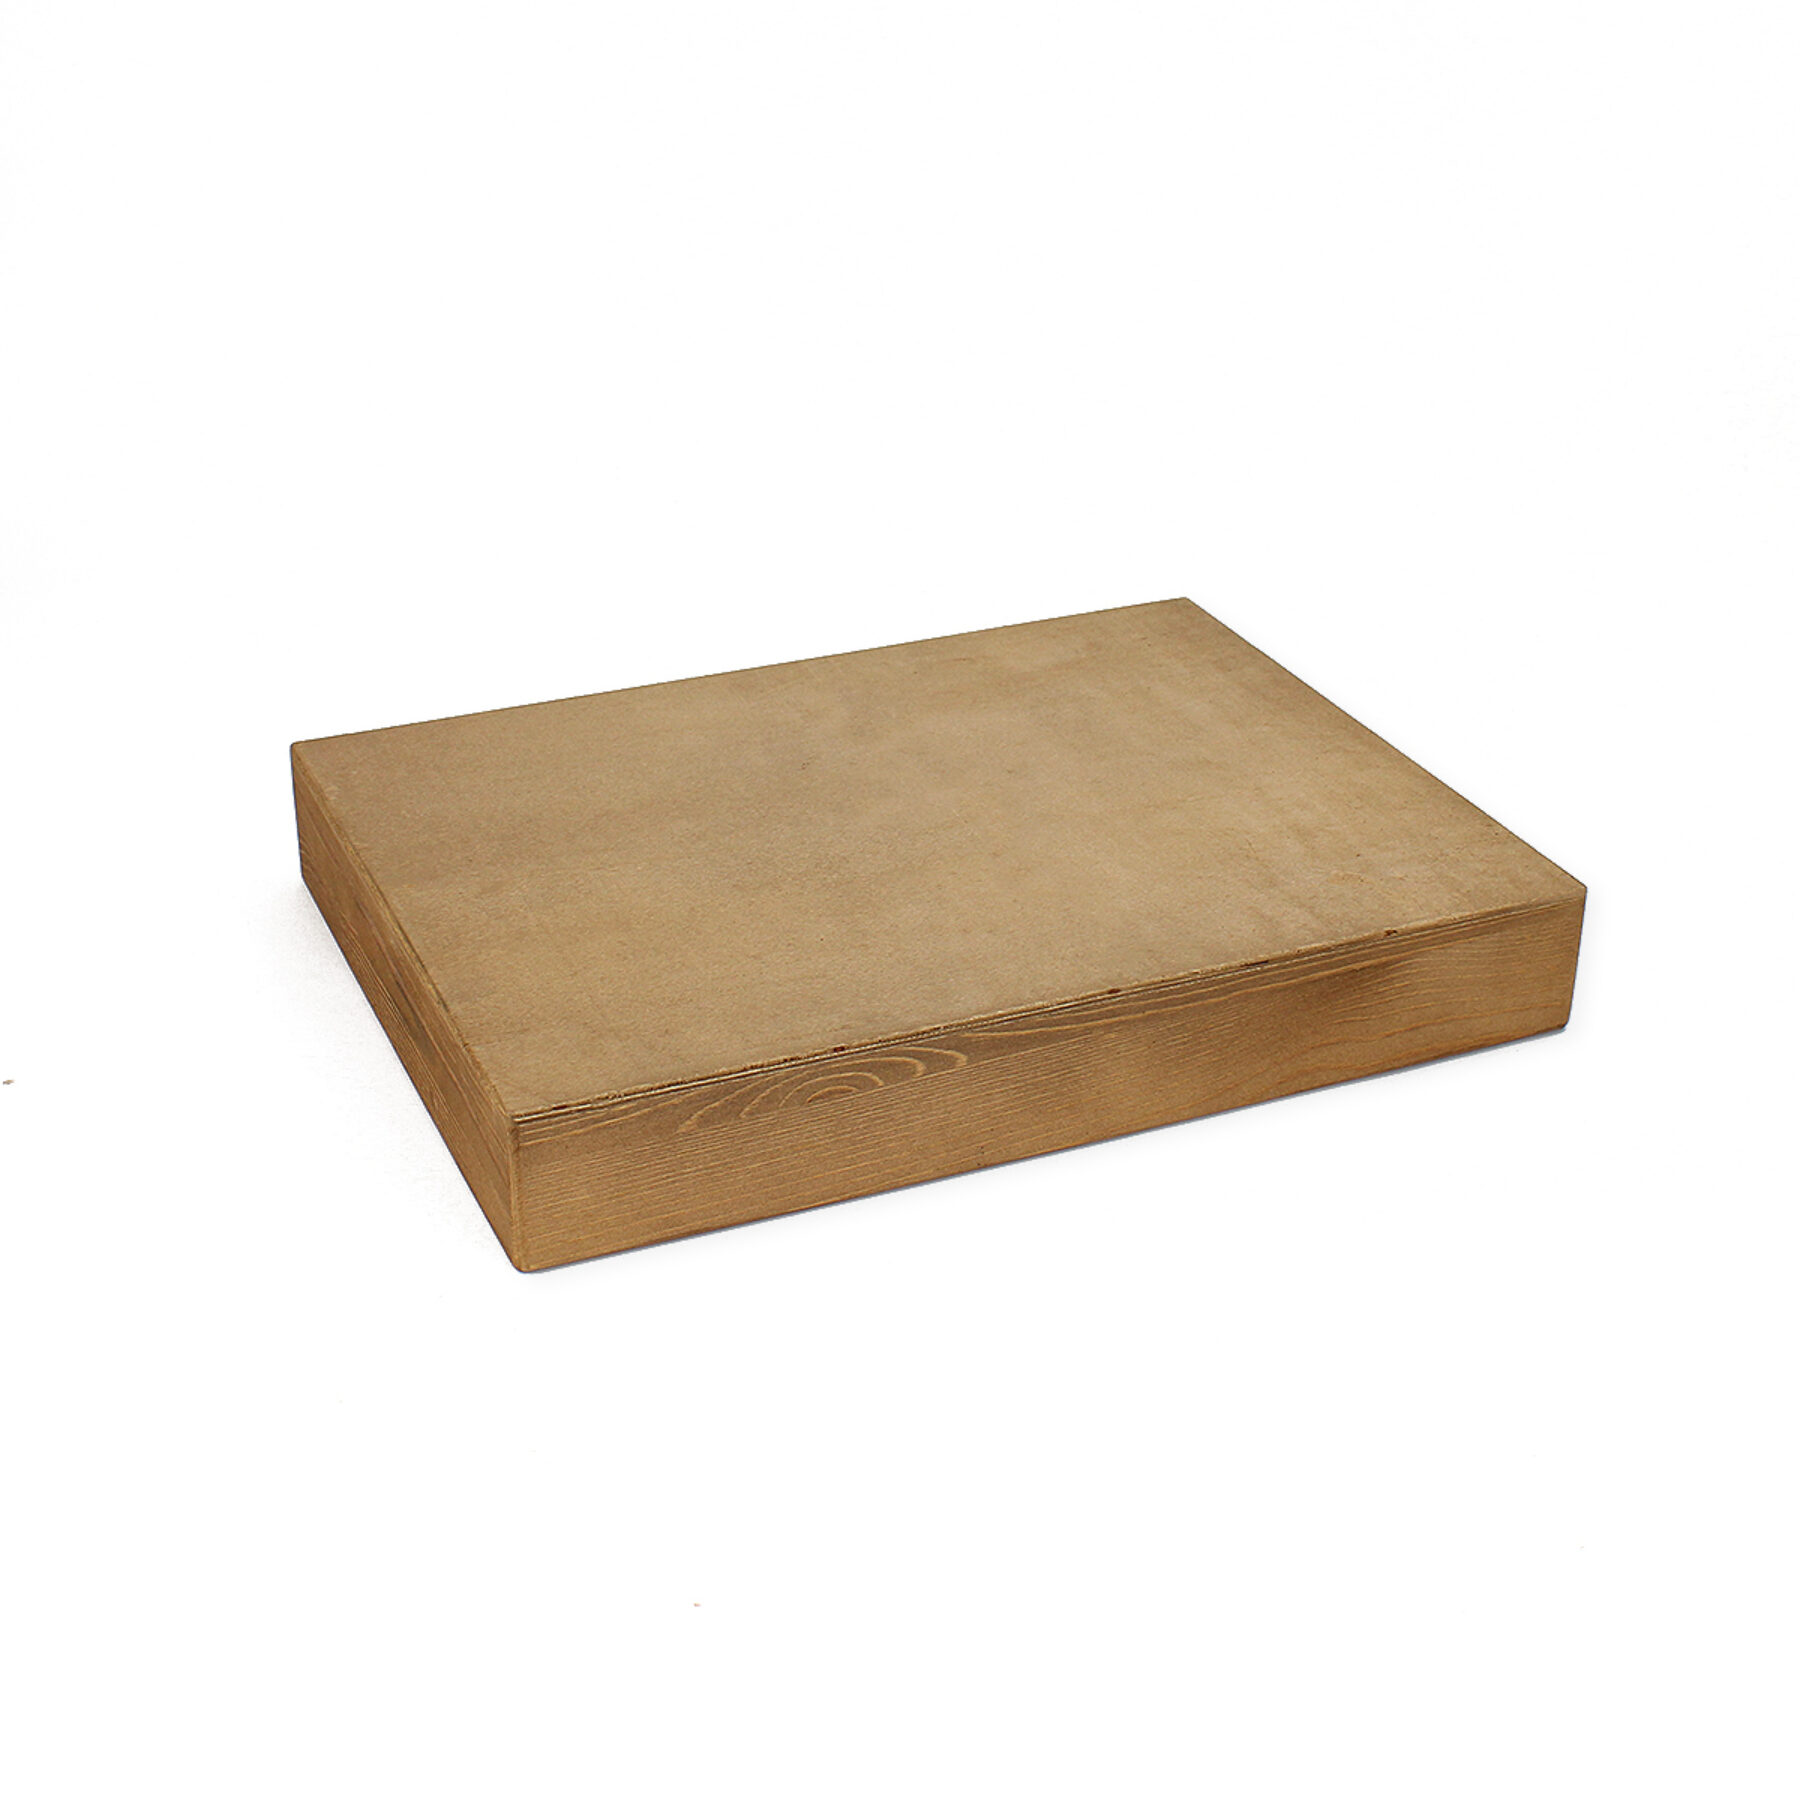 Large Wooden Display Tray - Base